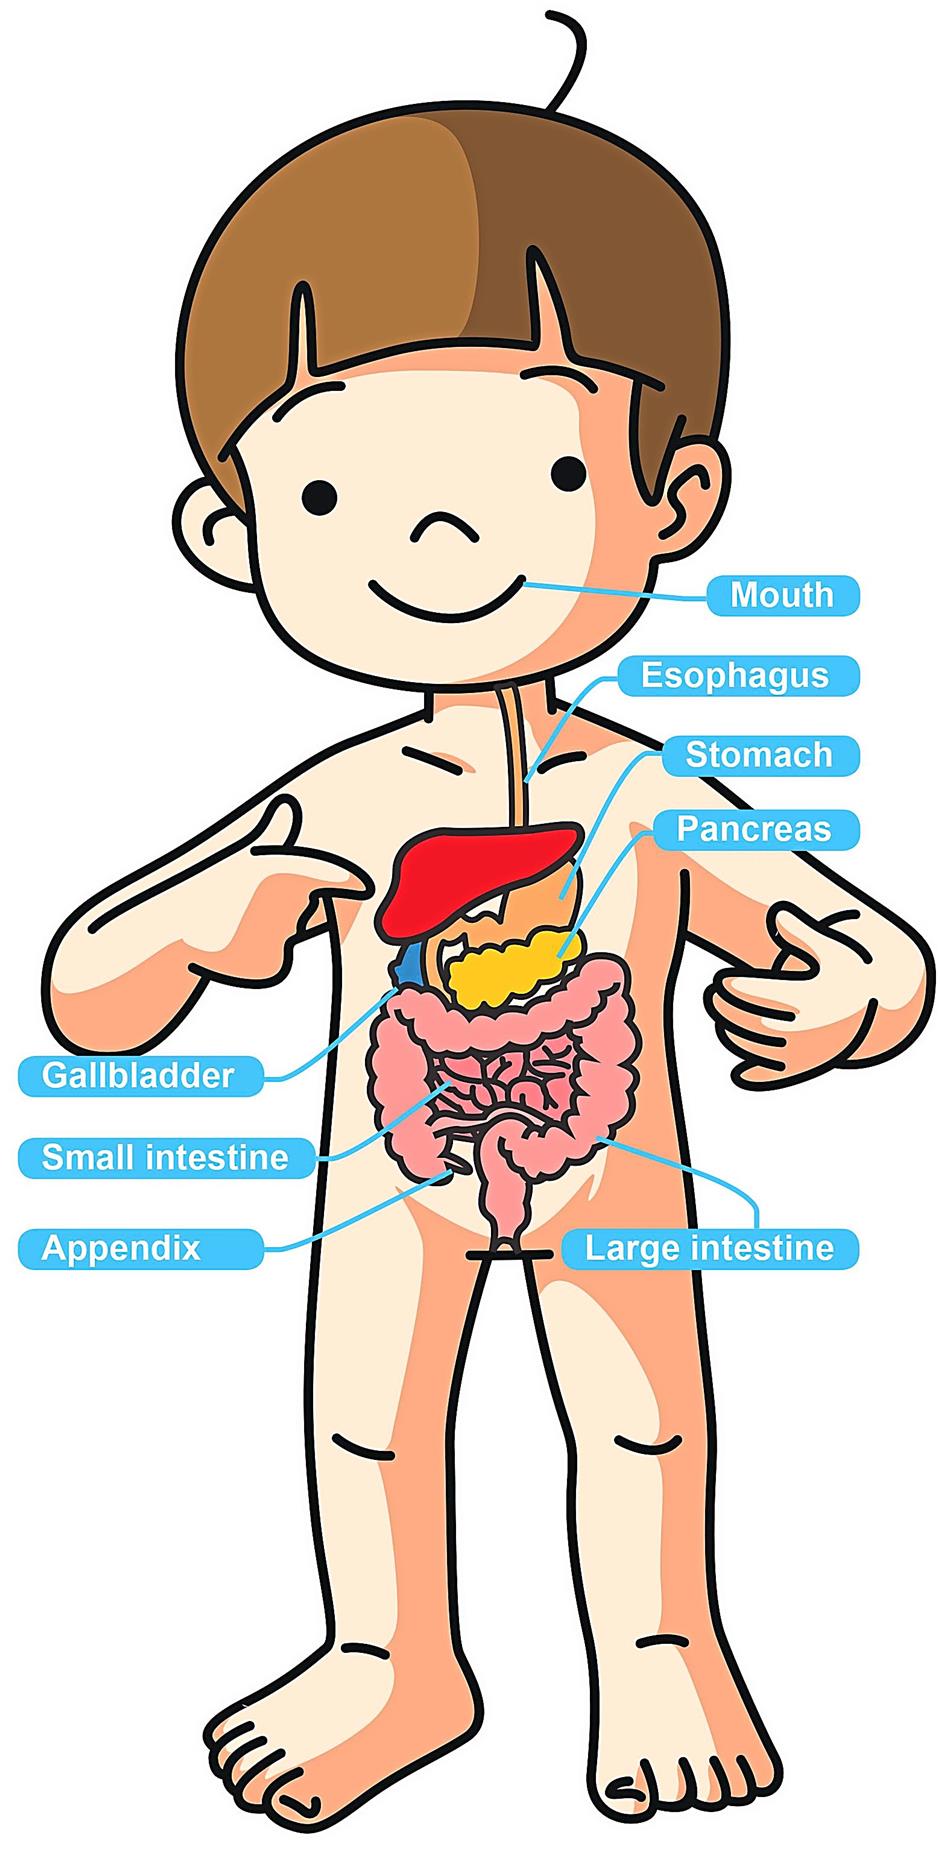 Take care of your child's digestive system, here's how - Star2.com